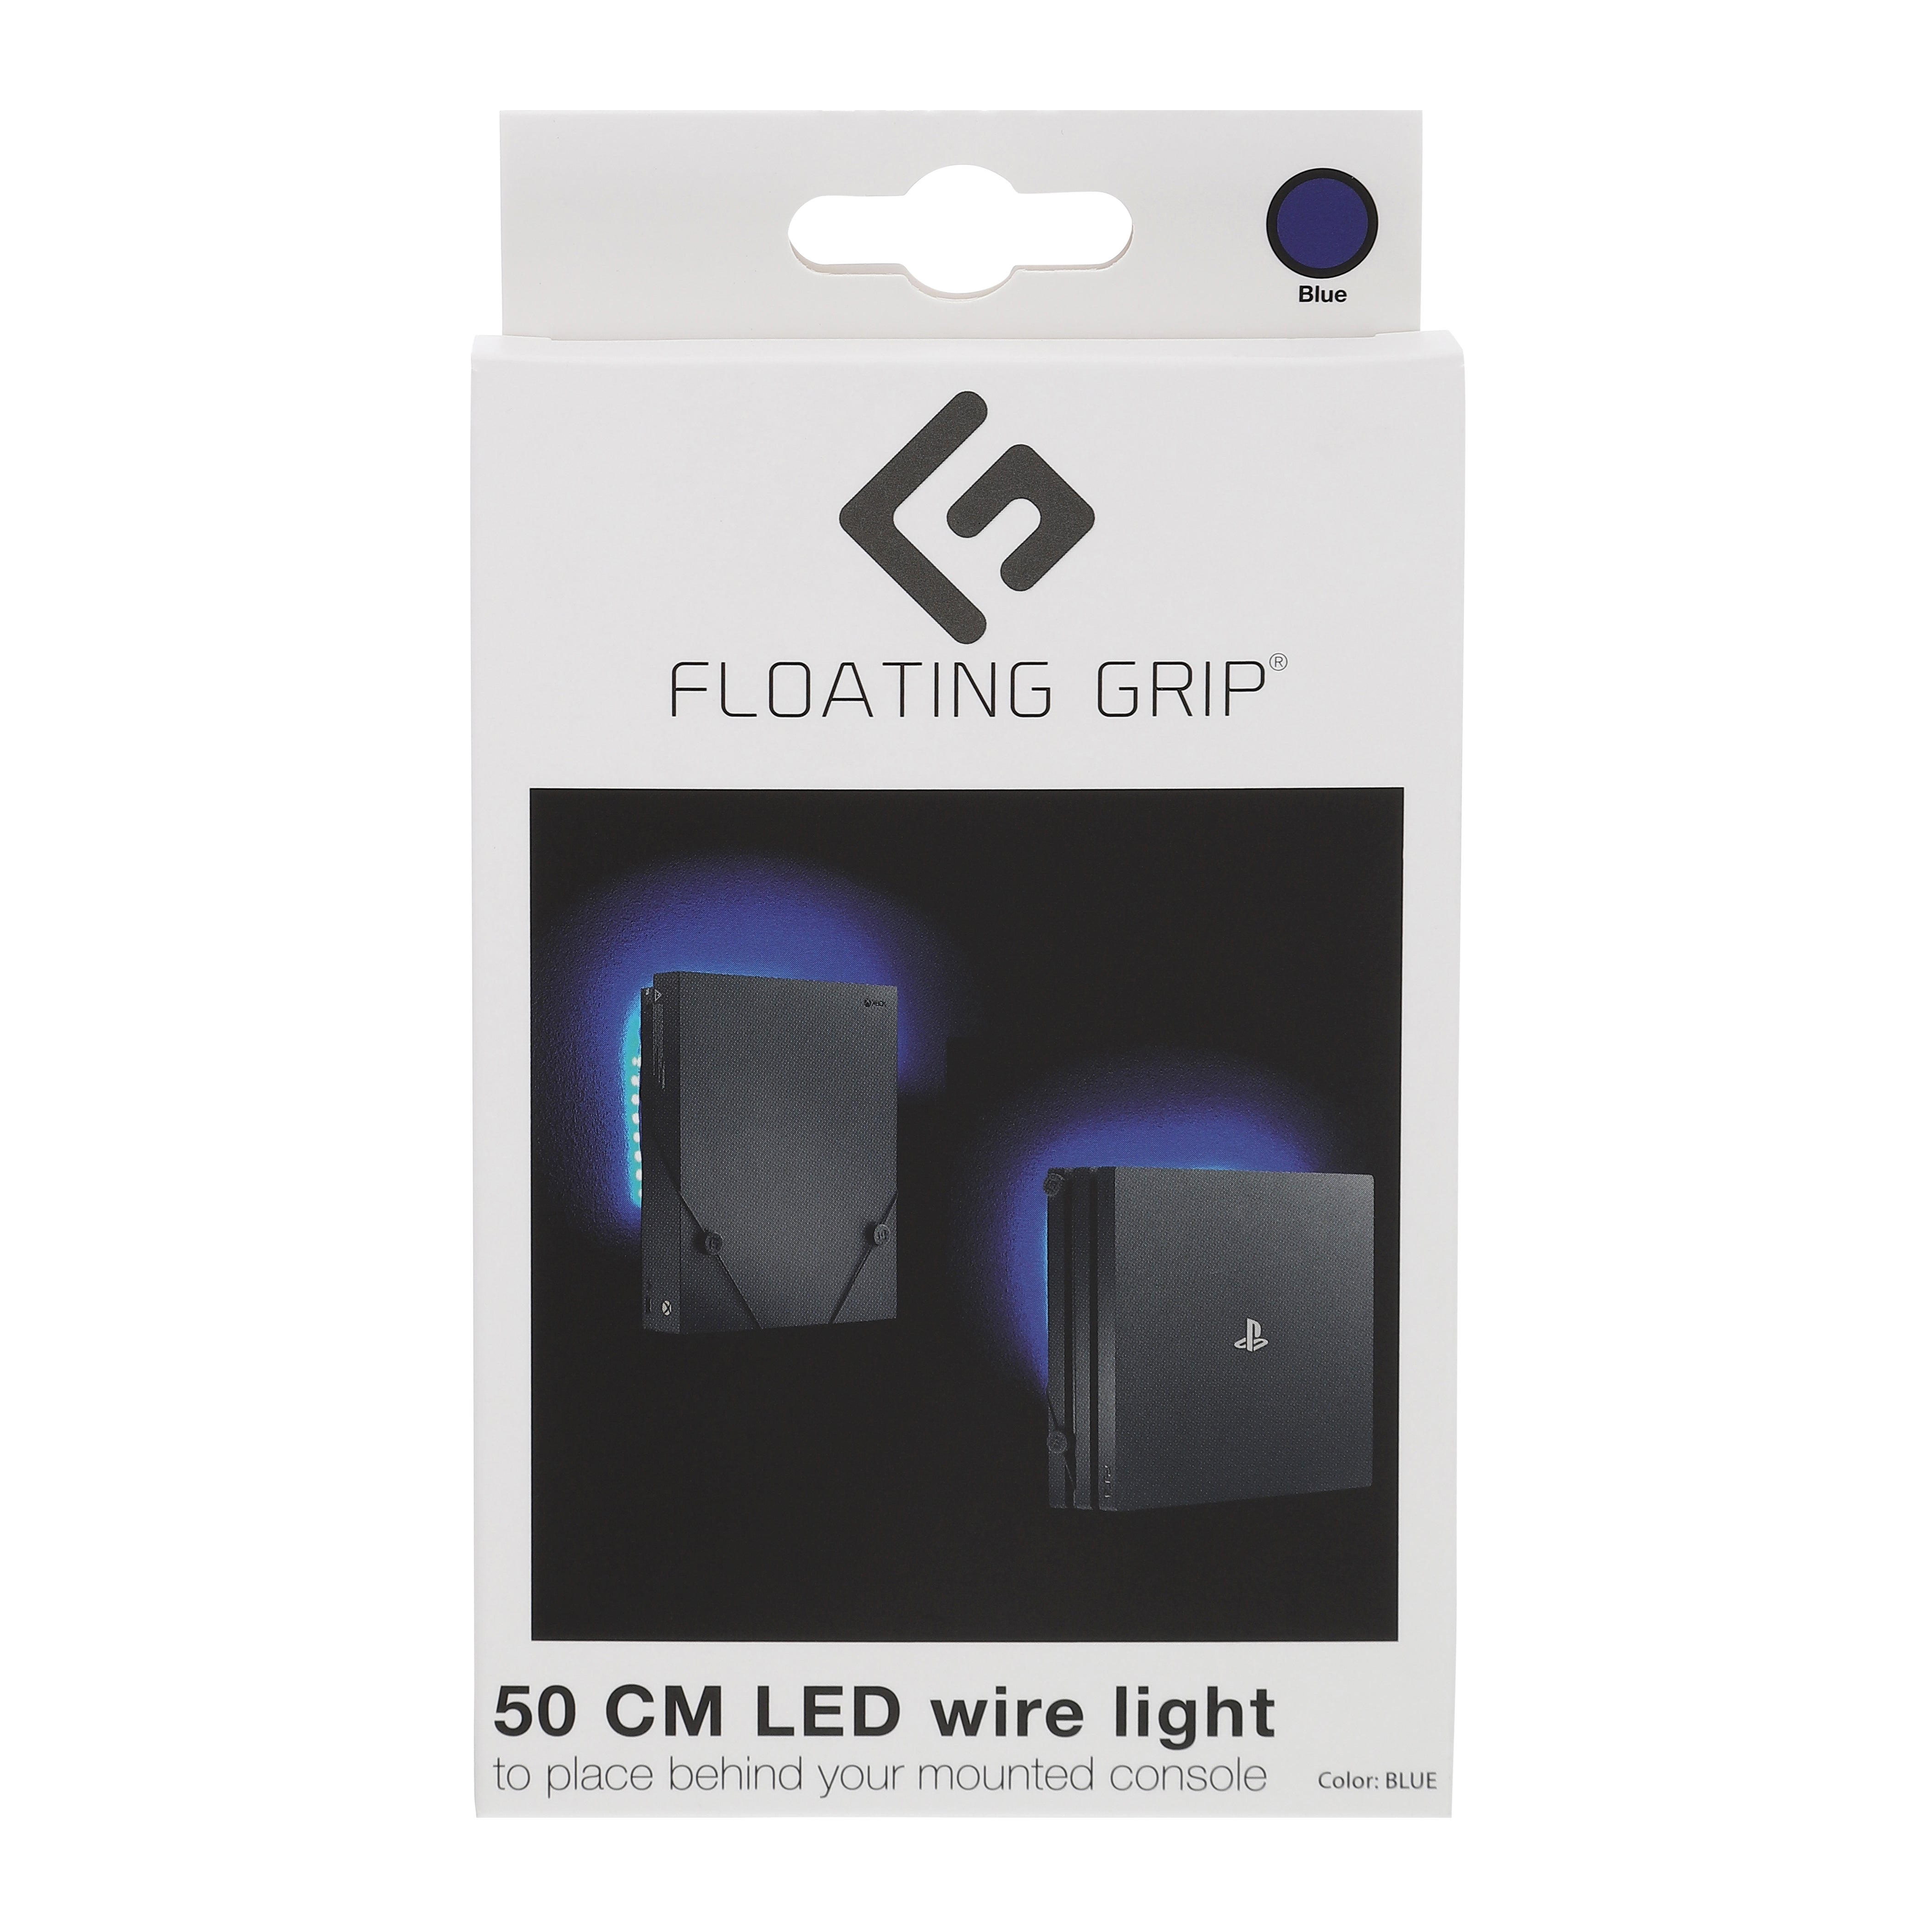 Floating Grip LED Wire Light